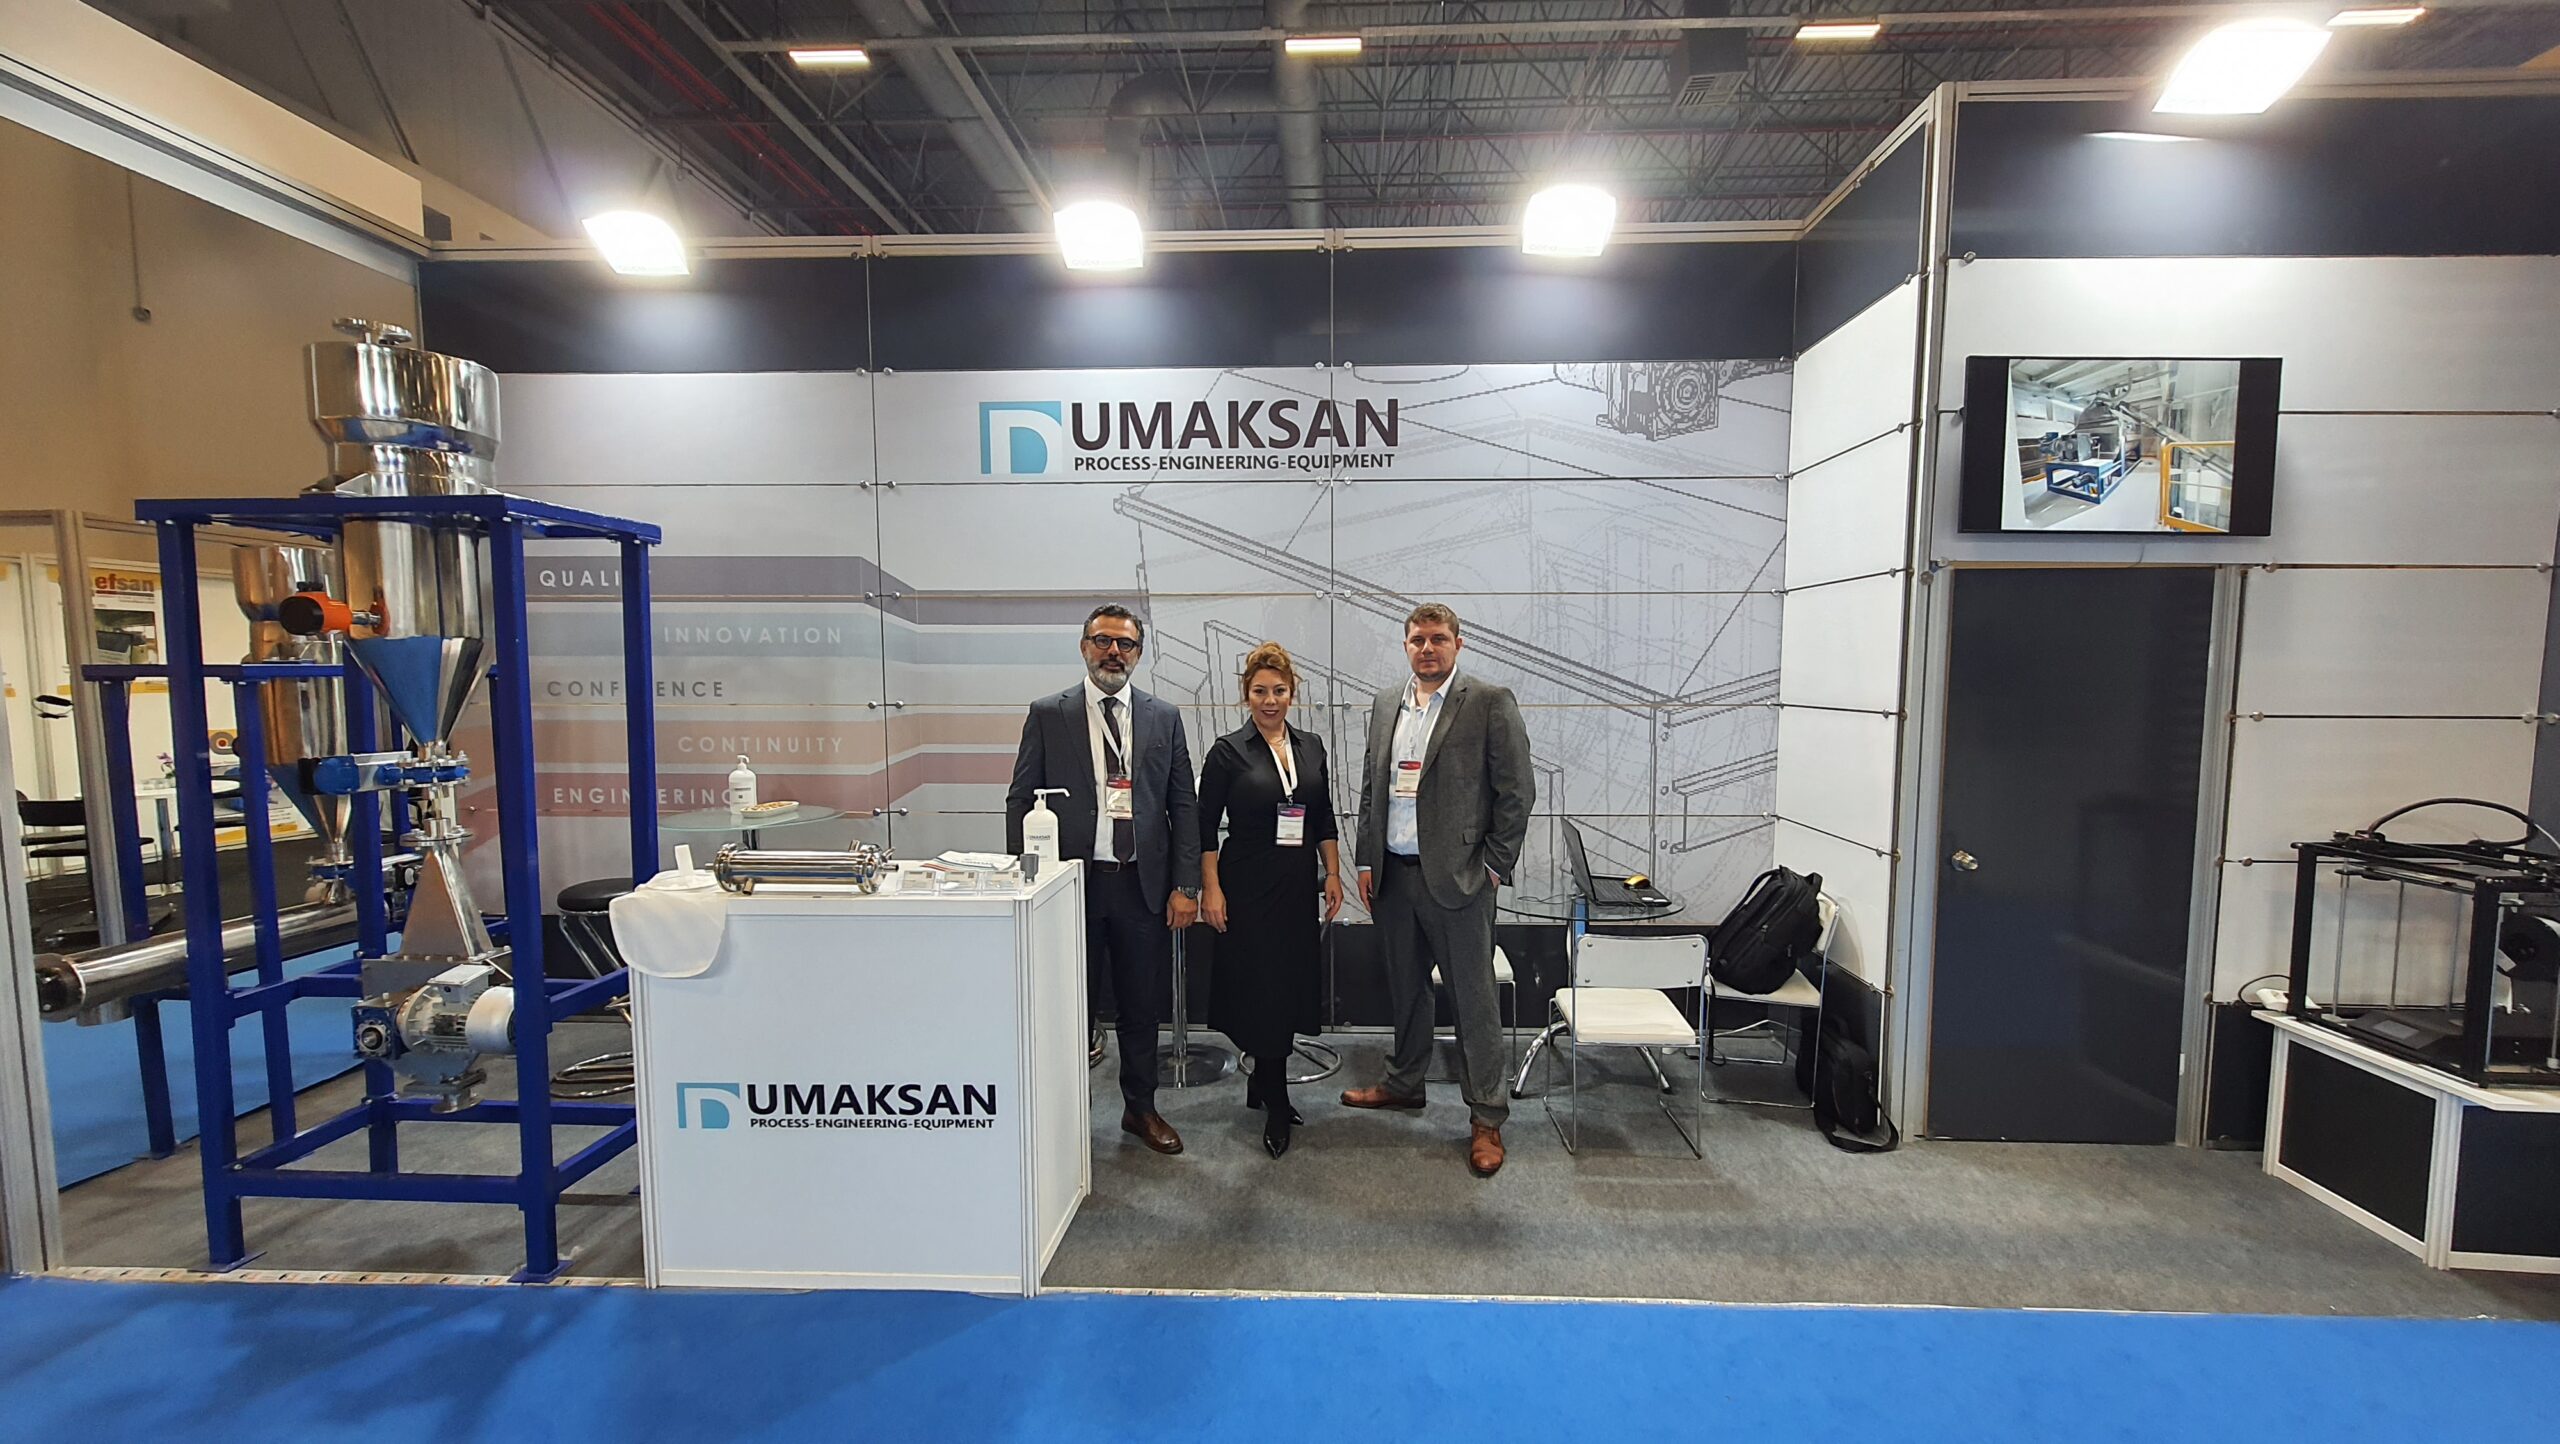 We attended the Turkchem exhibition this year.